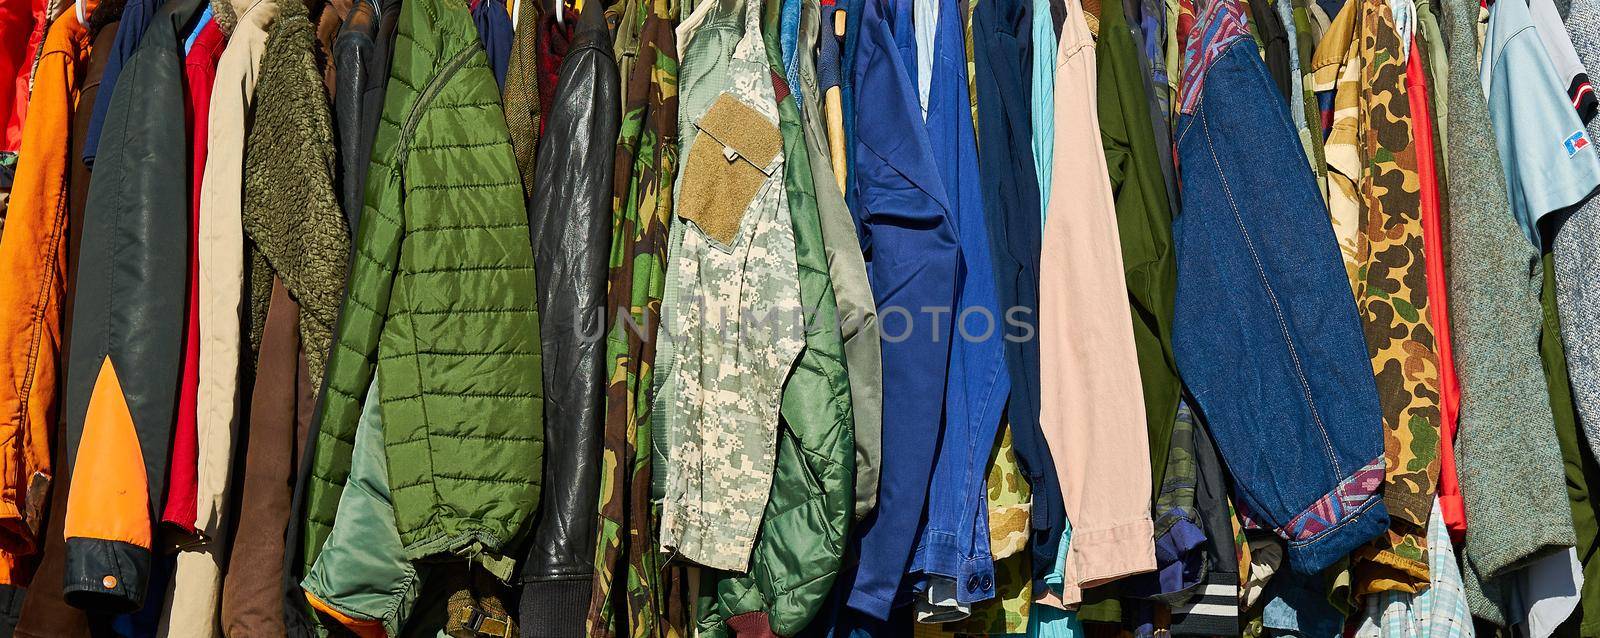 A row of jackets, coats and clothes of different colours, patterns and styles